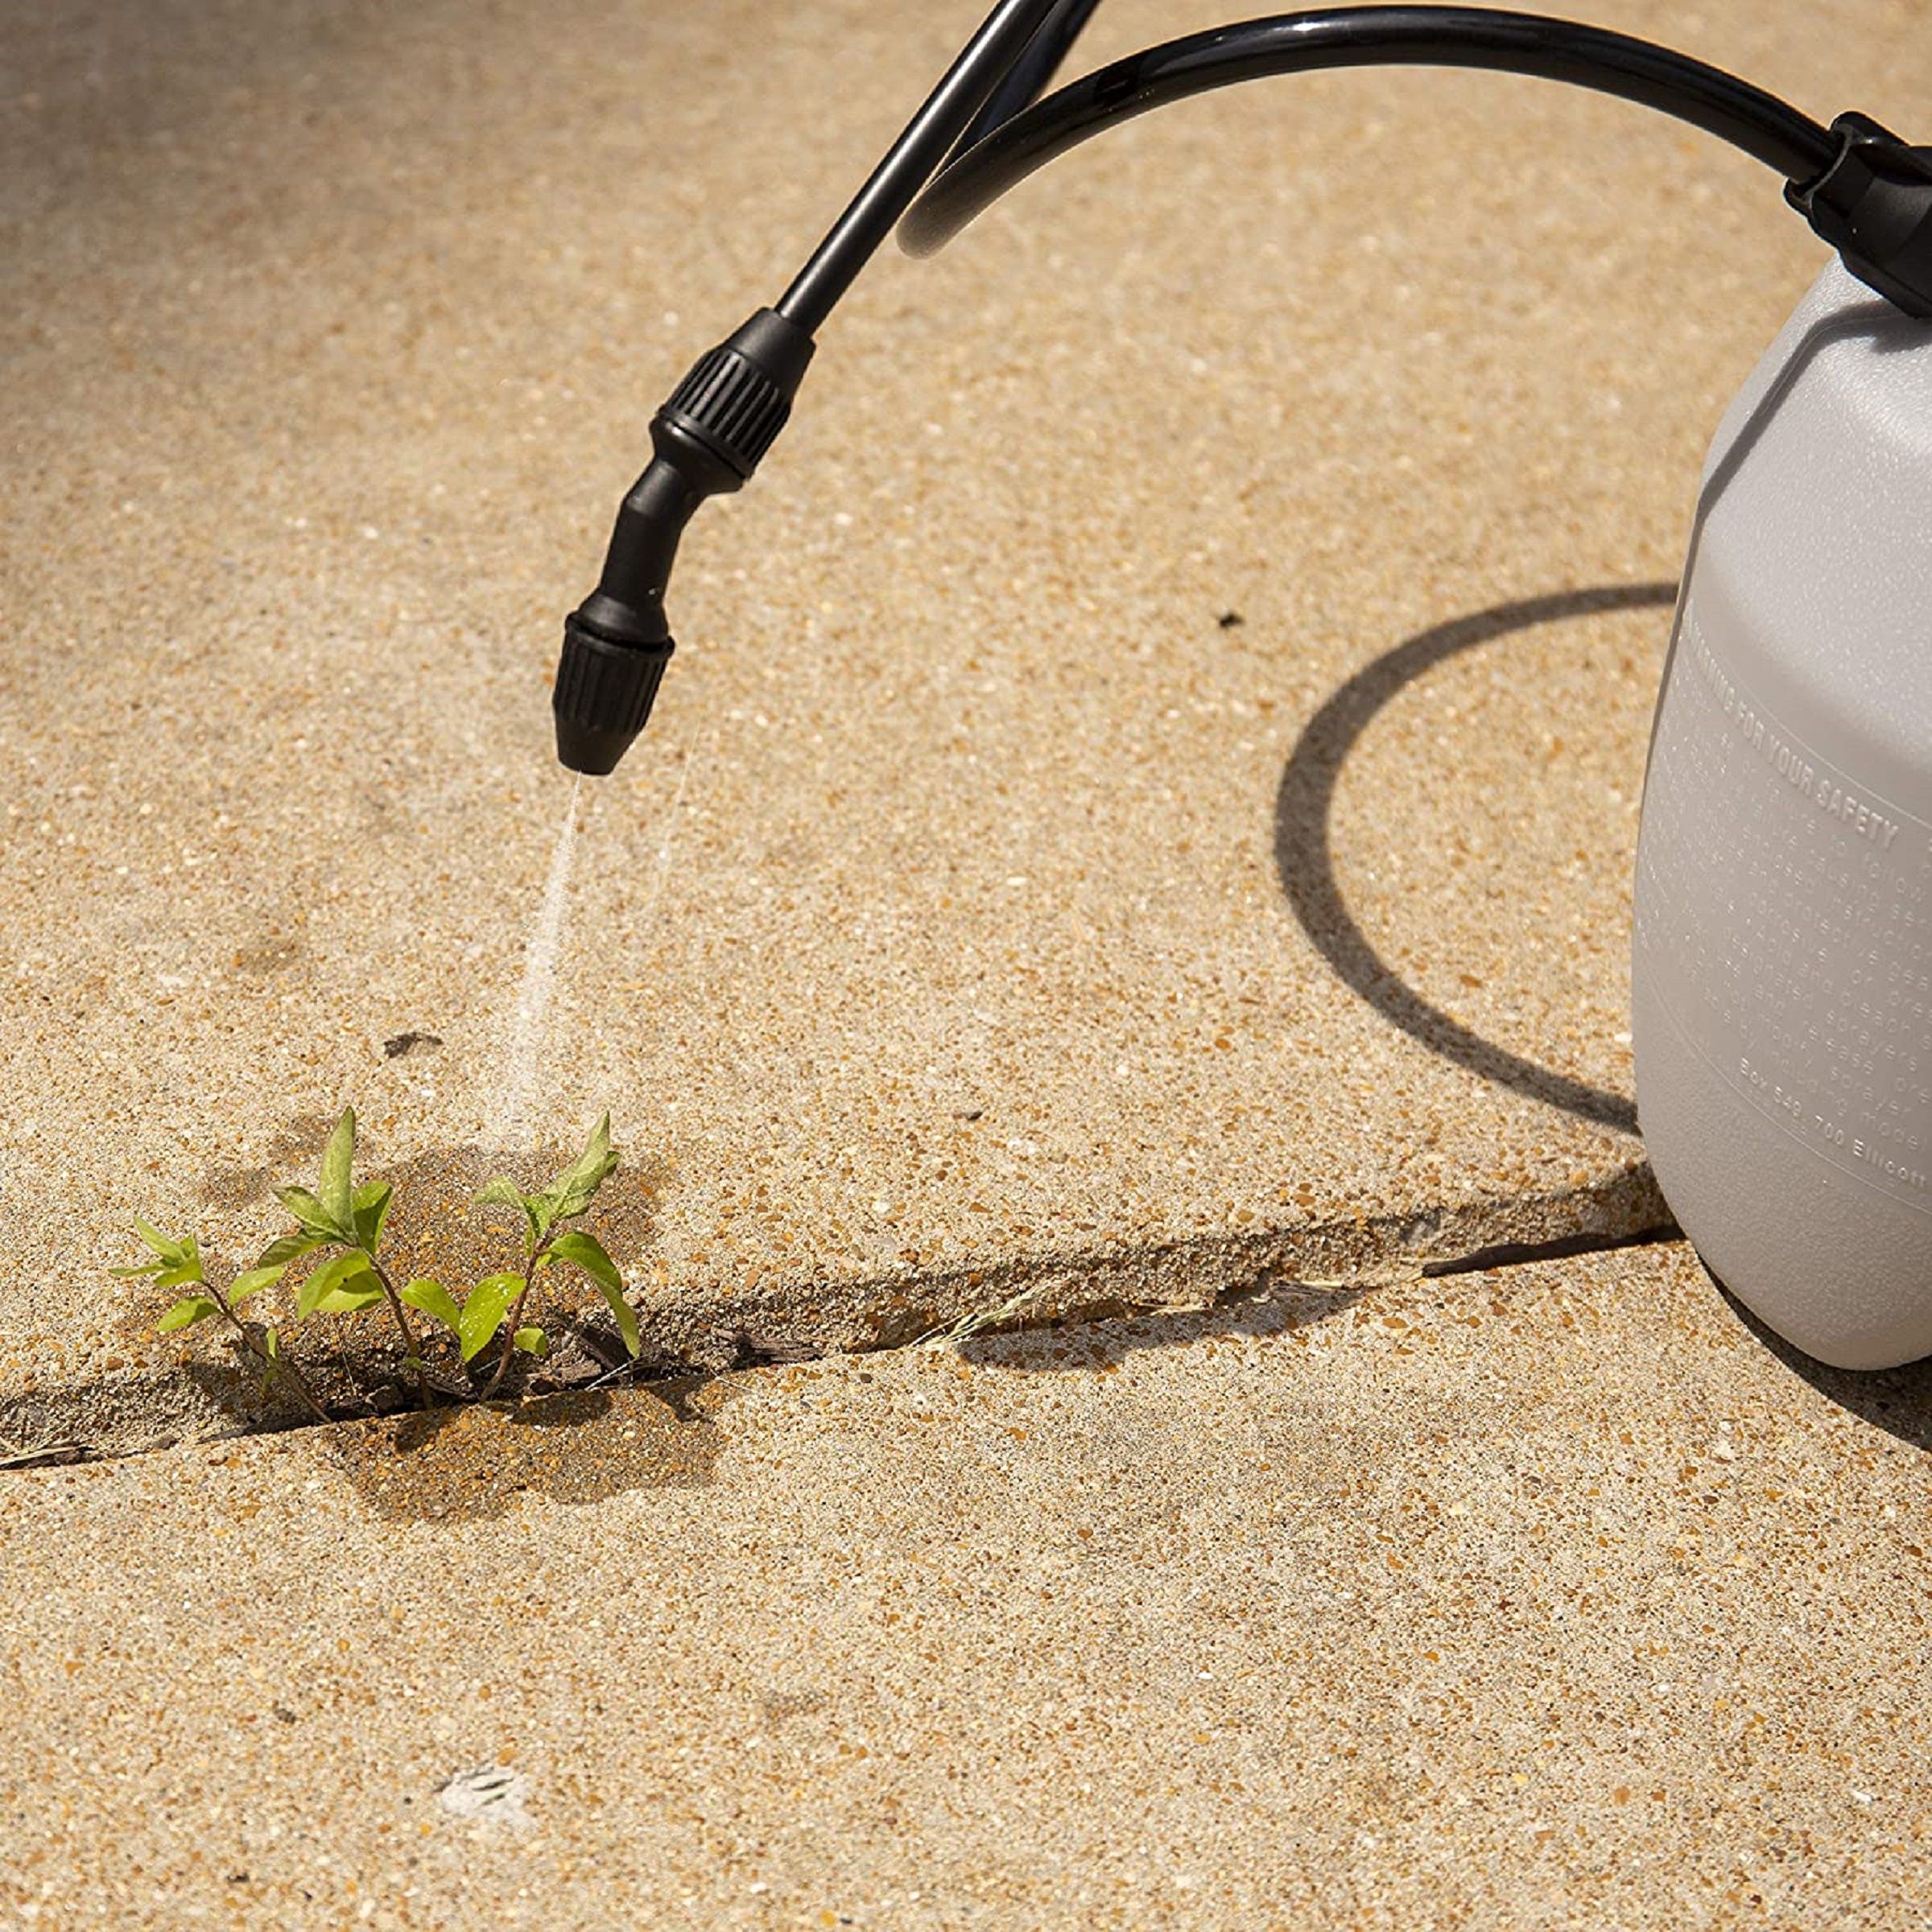 Image of an herbicide being sprayed onto a weed in a sidewalk crevice. Cover image for This Old House's Best Weed Killer Guide and Product Review.